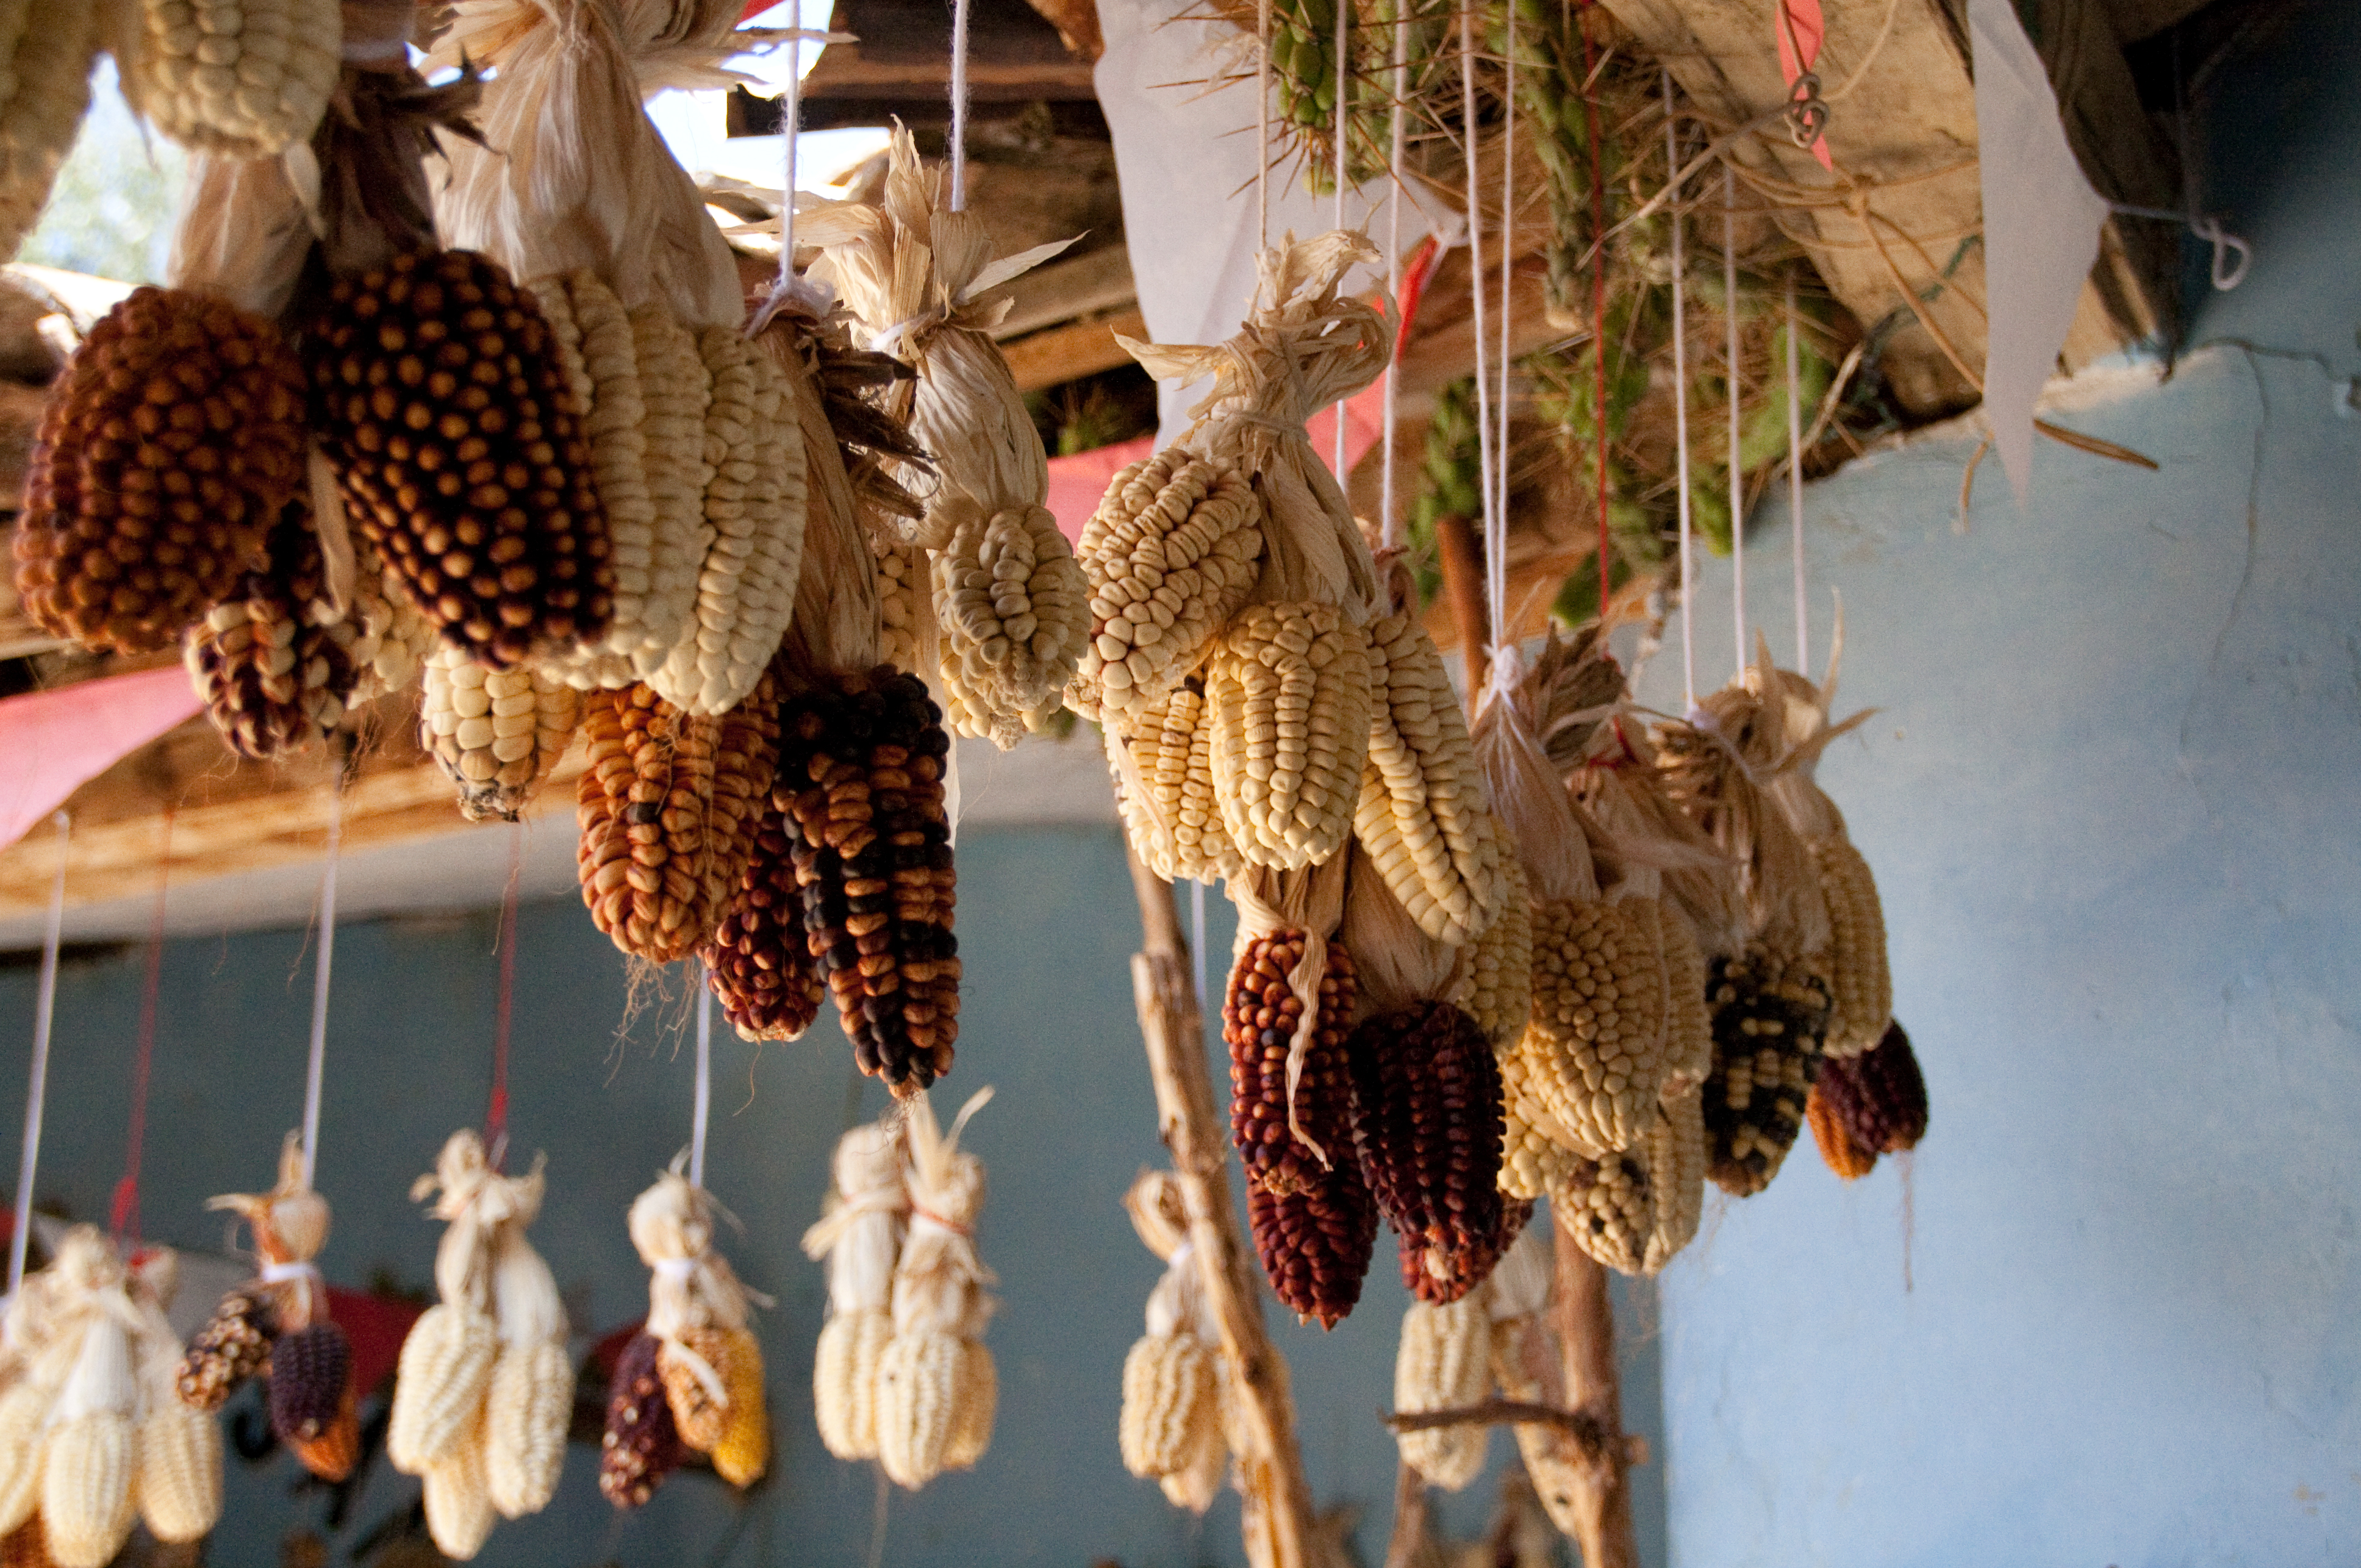 Traditional maize varieties in Peru